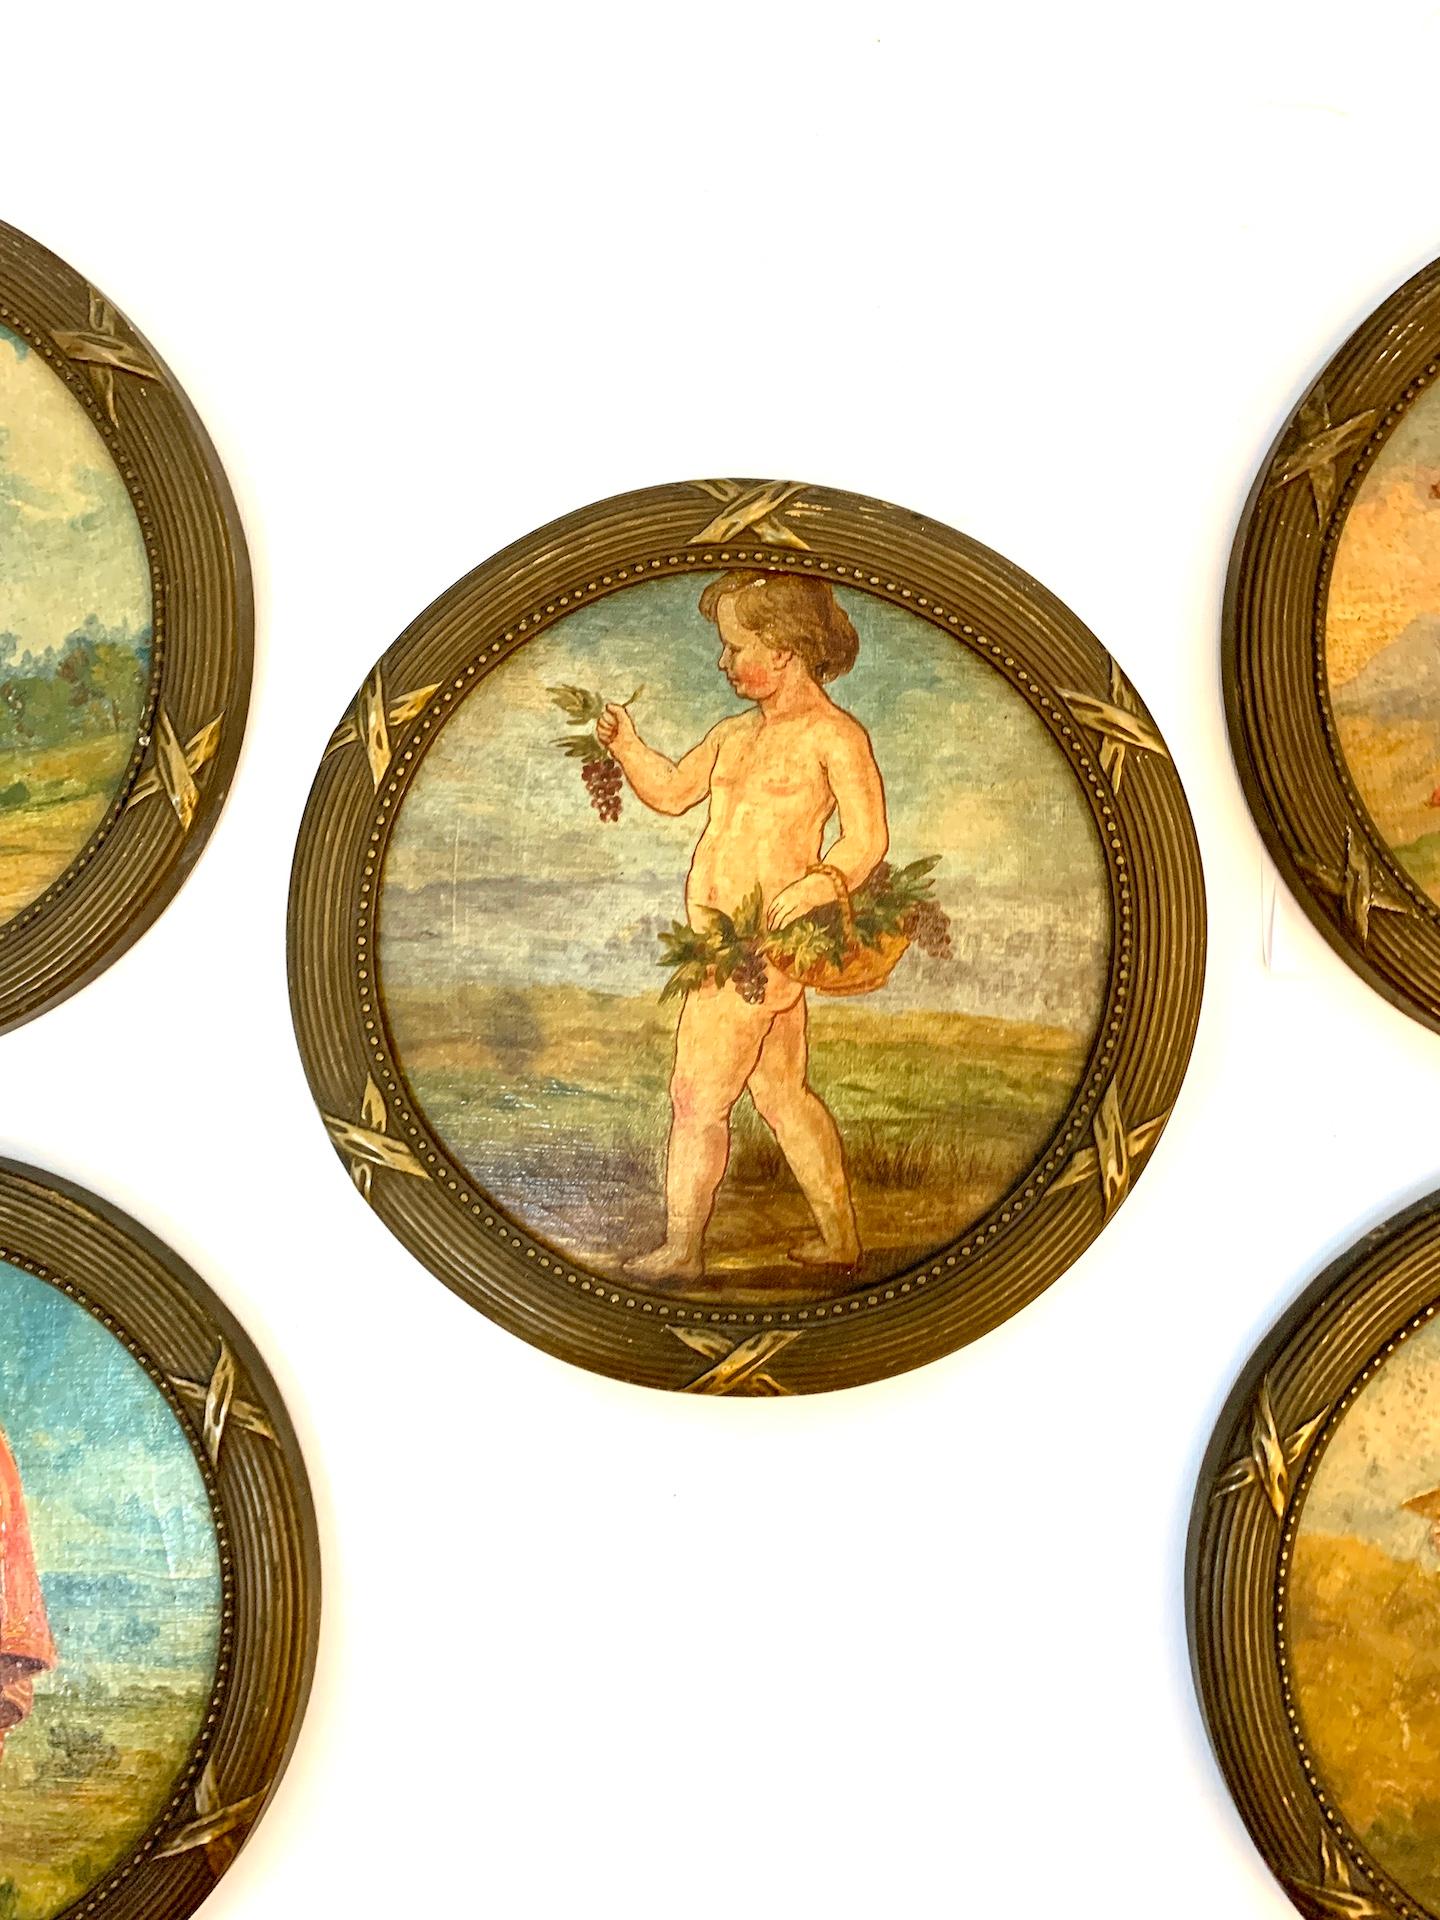 Set of Five late 19th century Italian or French portraits of Putti or Angels - Brown Figurative Painting by 19th century Italian School